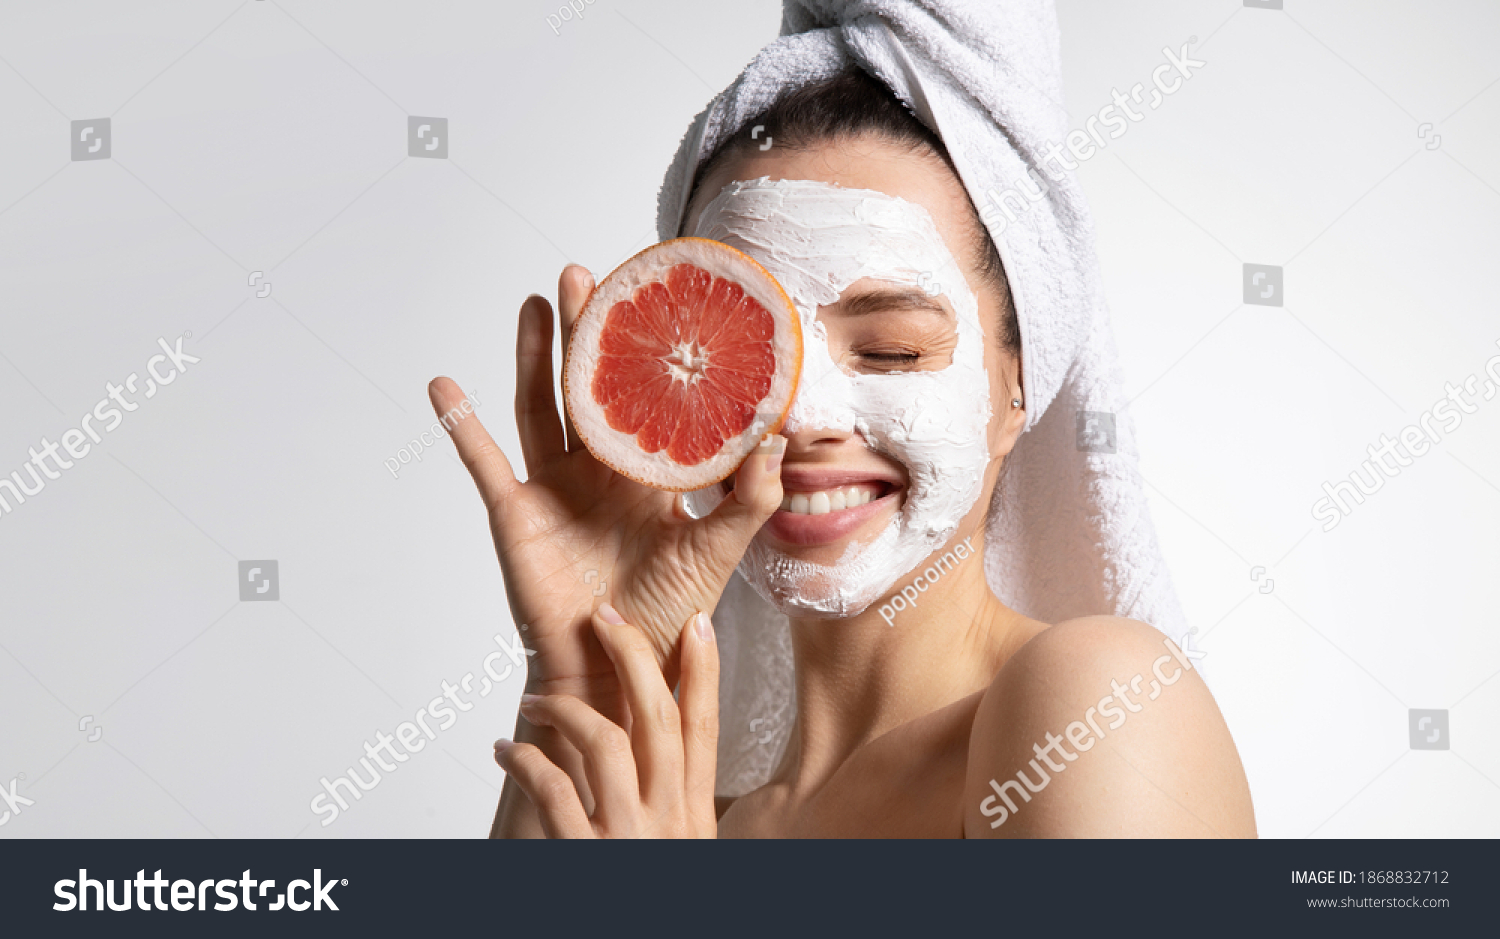 Close up of happy young playful teen girl in moisturizing mask and towel holds grapefruit covers eye. Advertising poster of facial eco-friendly skincare products. Morning beauty routine #1868832712